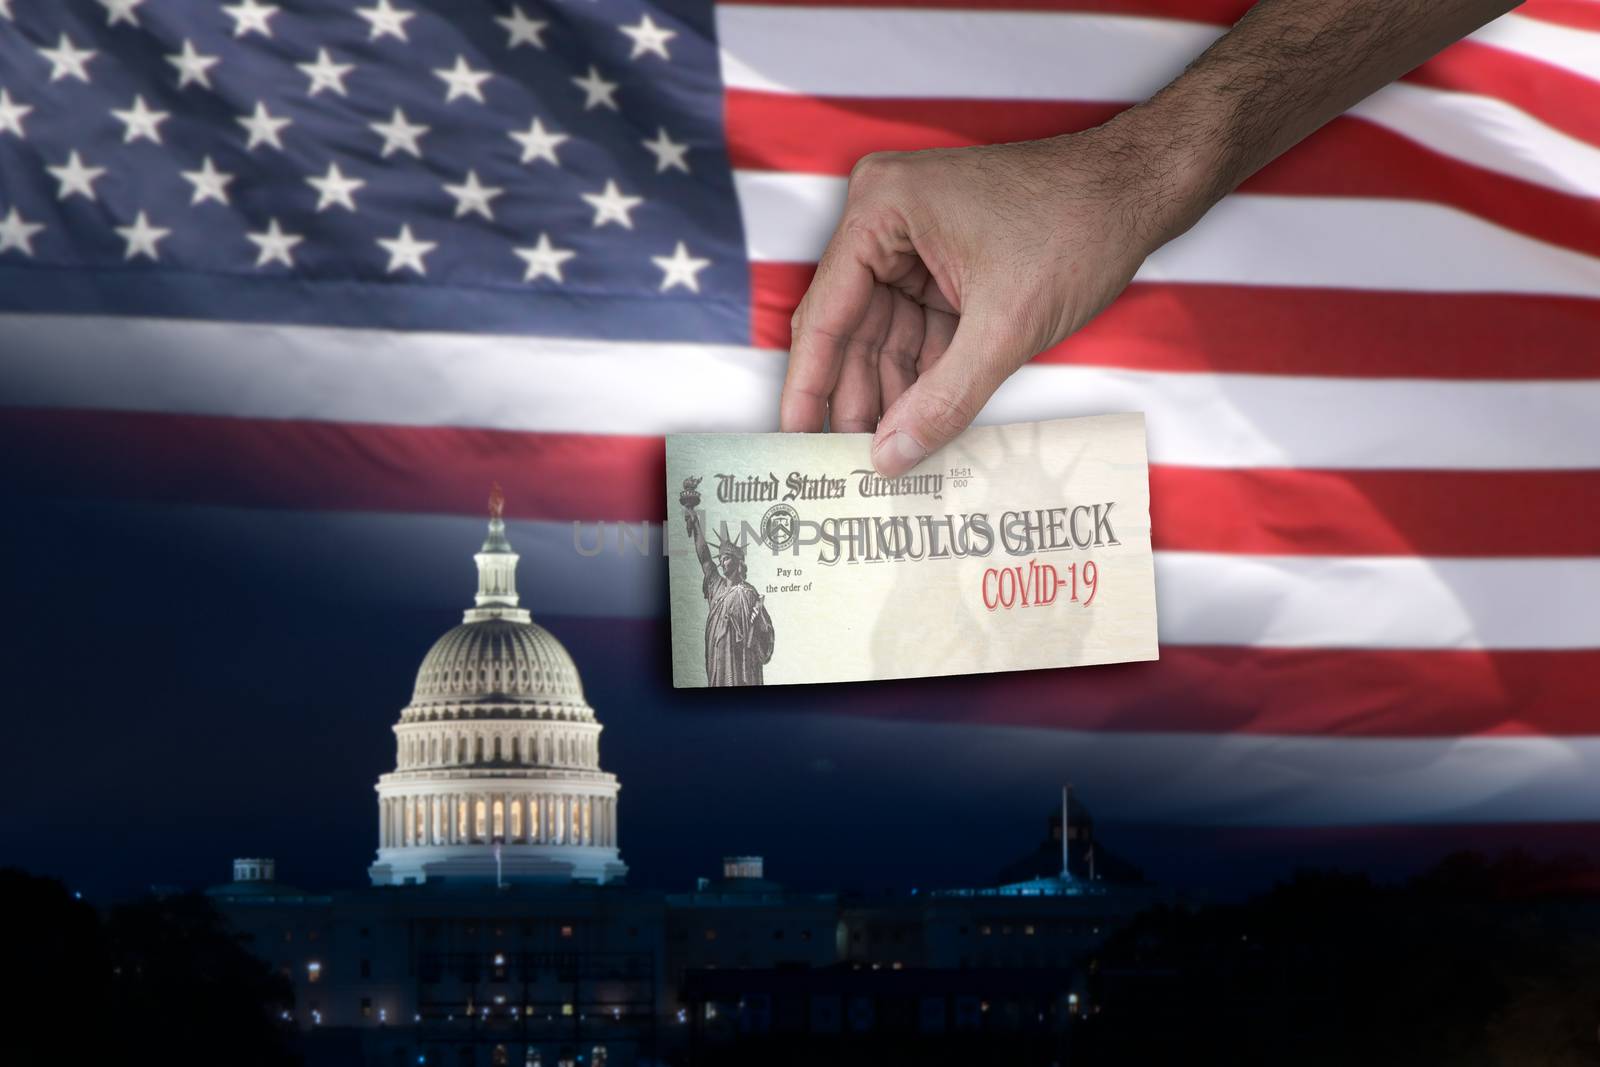 Man with Stimulus check and the Capitol and US flag on the Background. The US government is preparing to send out direct payments to help individuals amid the coronavirus pandemic